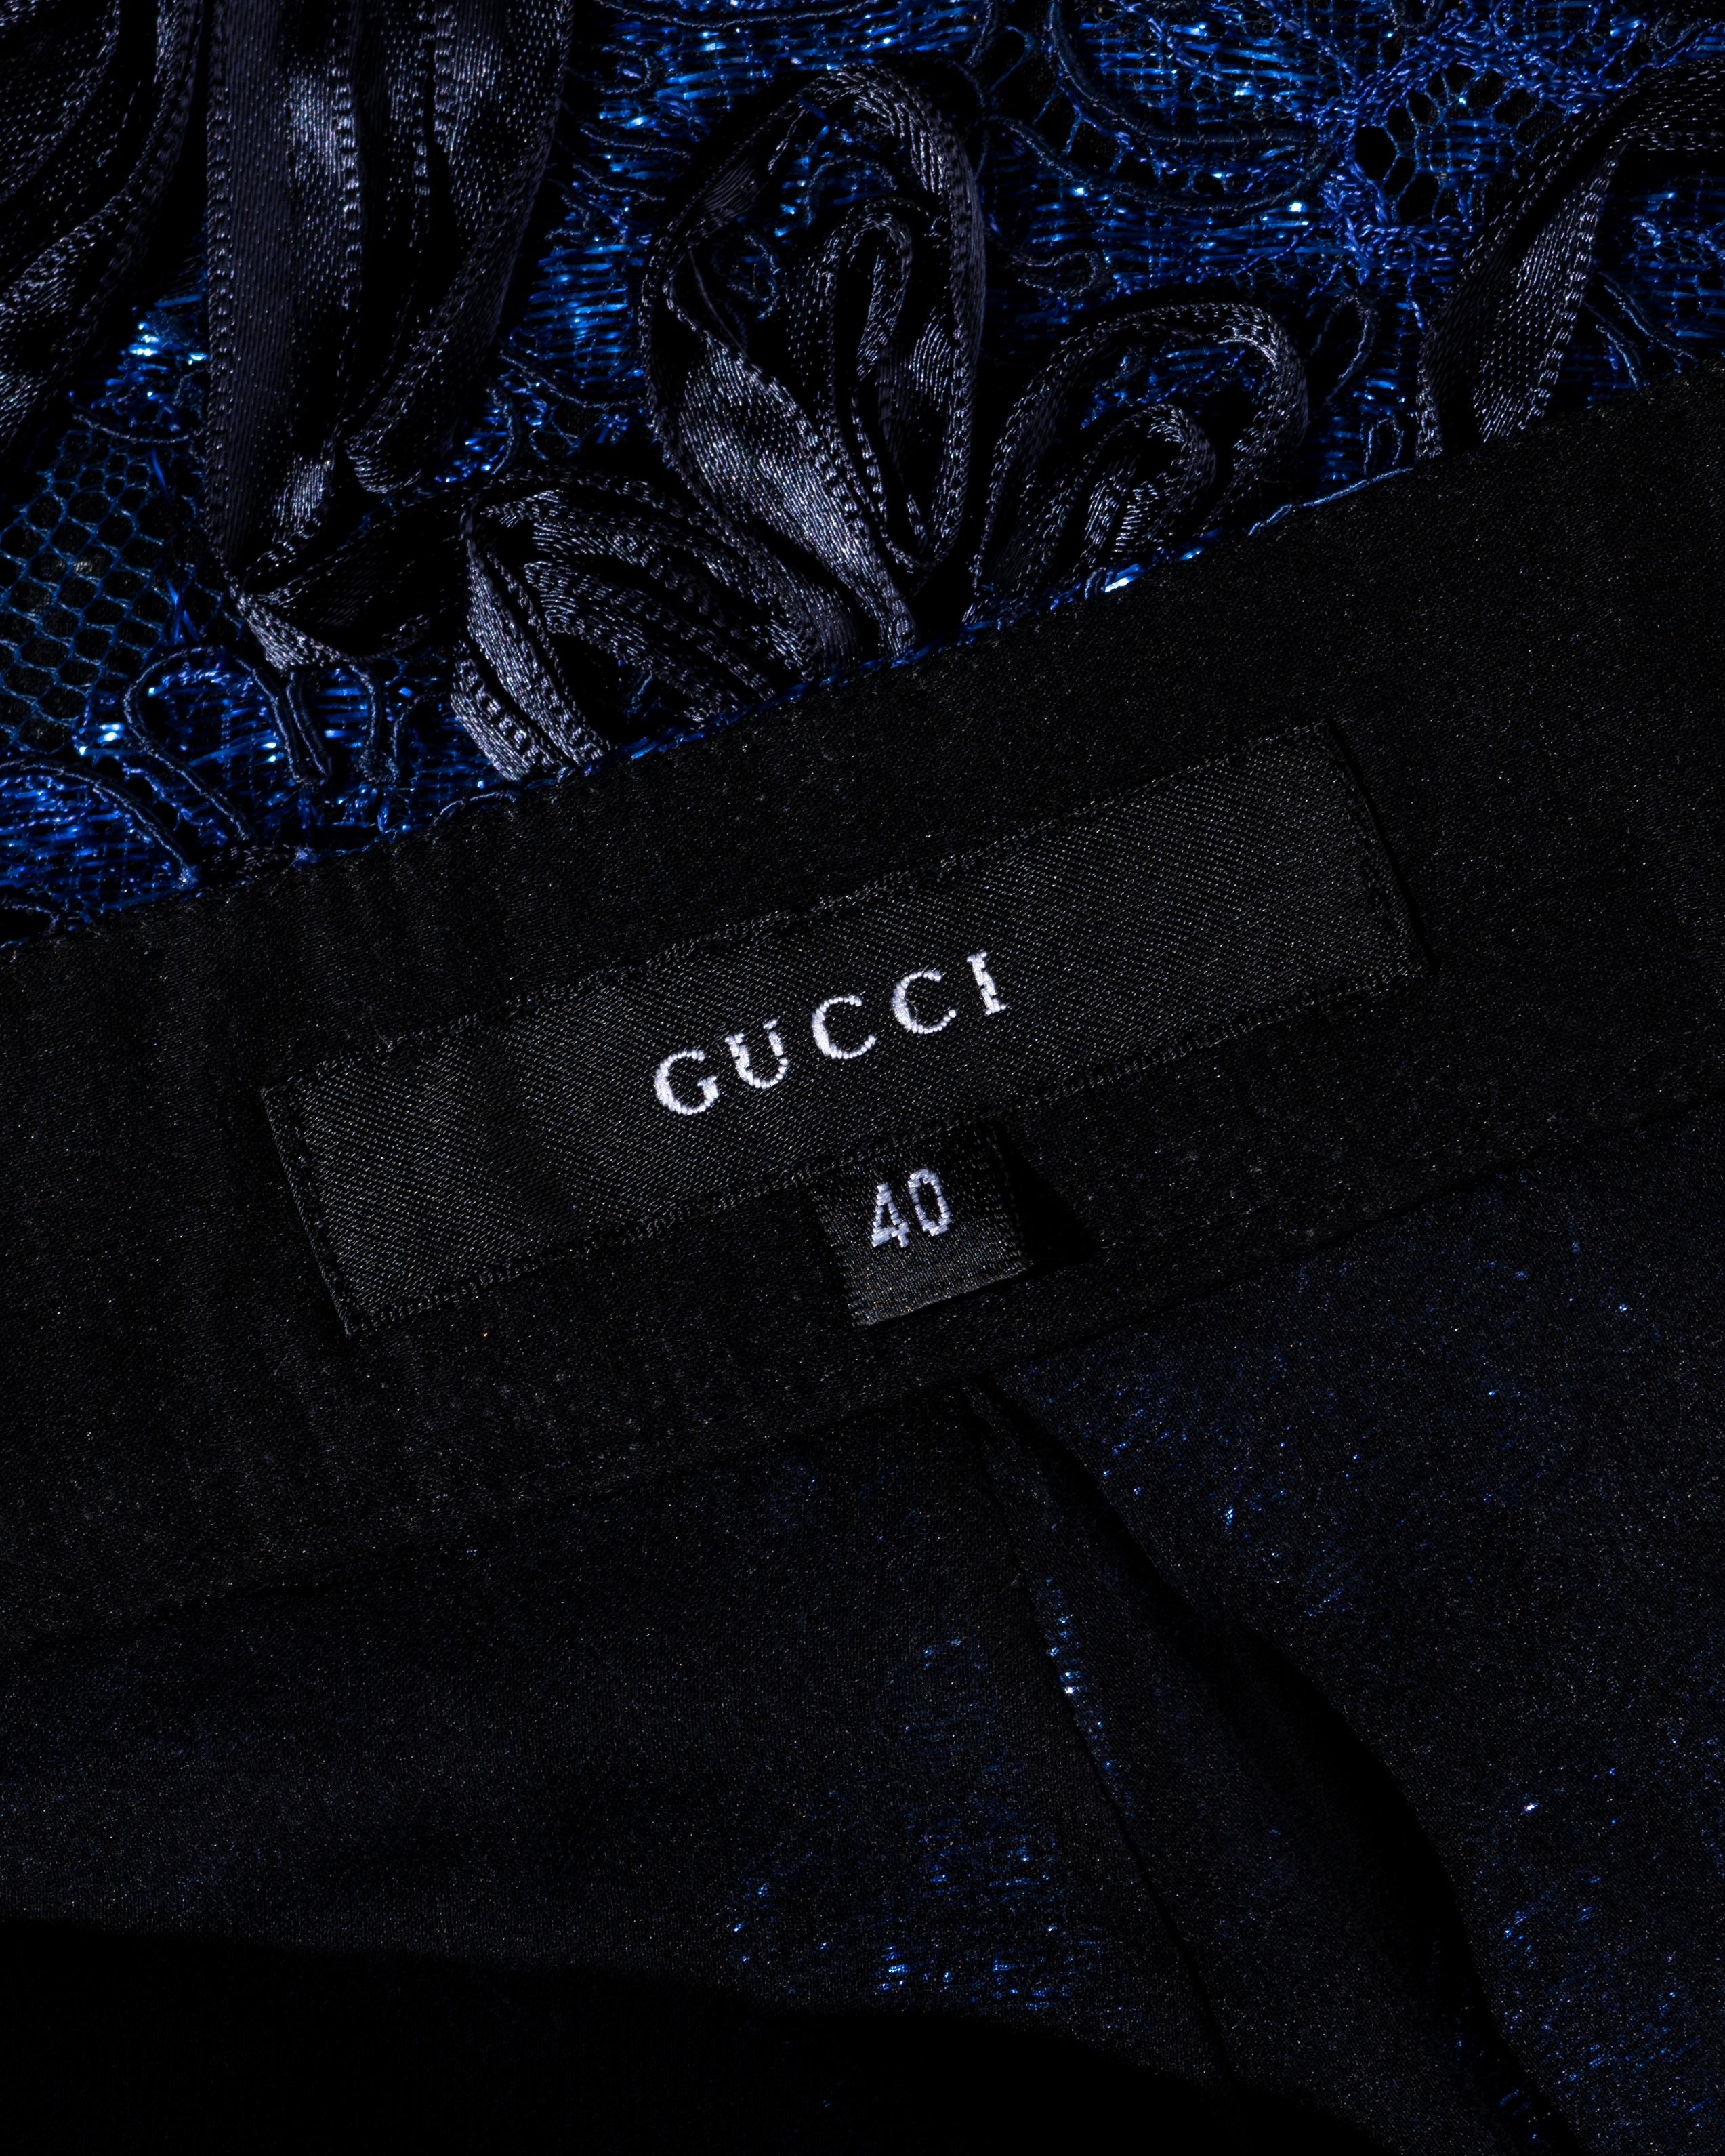 Gucci by Tom Ford blue and black lamé floral lace flared pants, fw 1999 For Sale 6